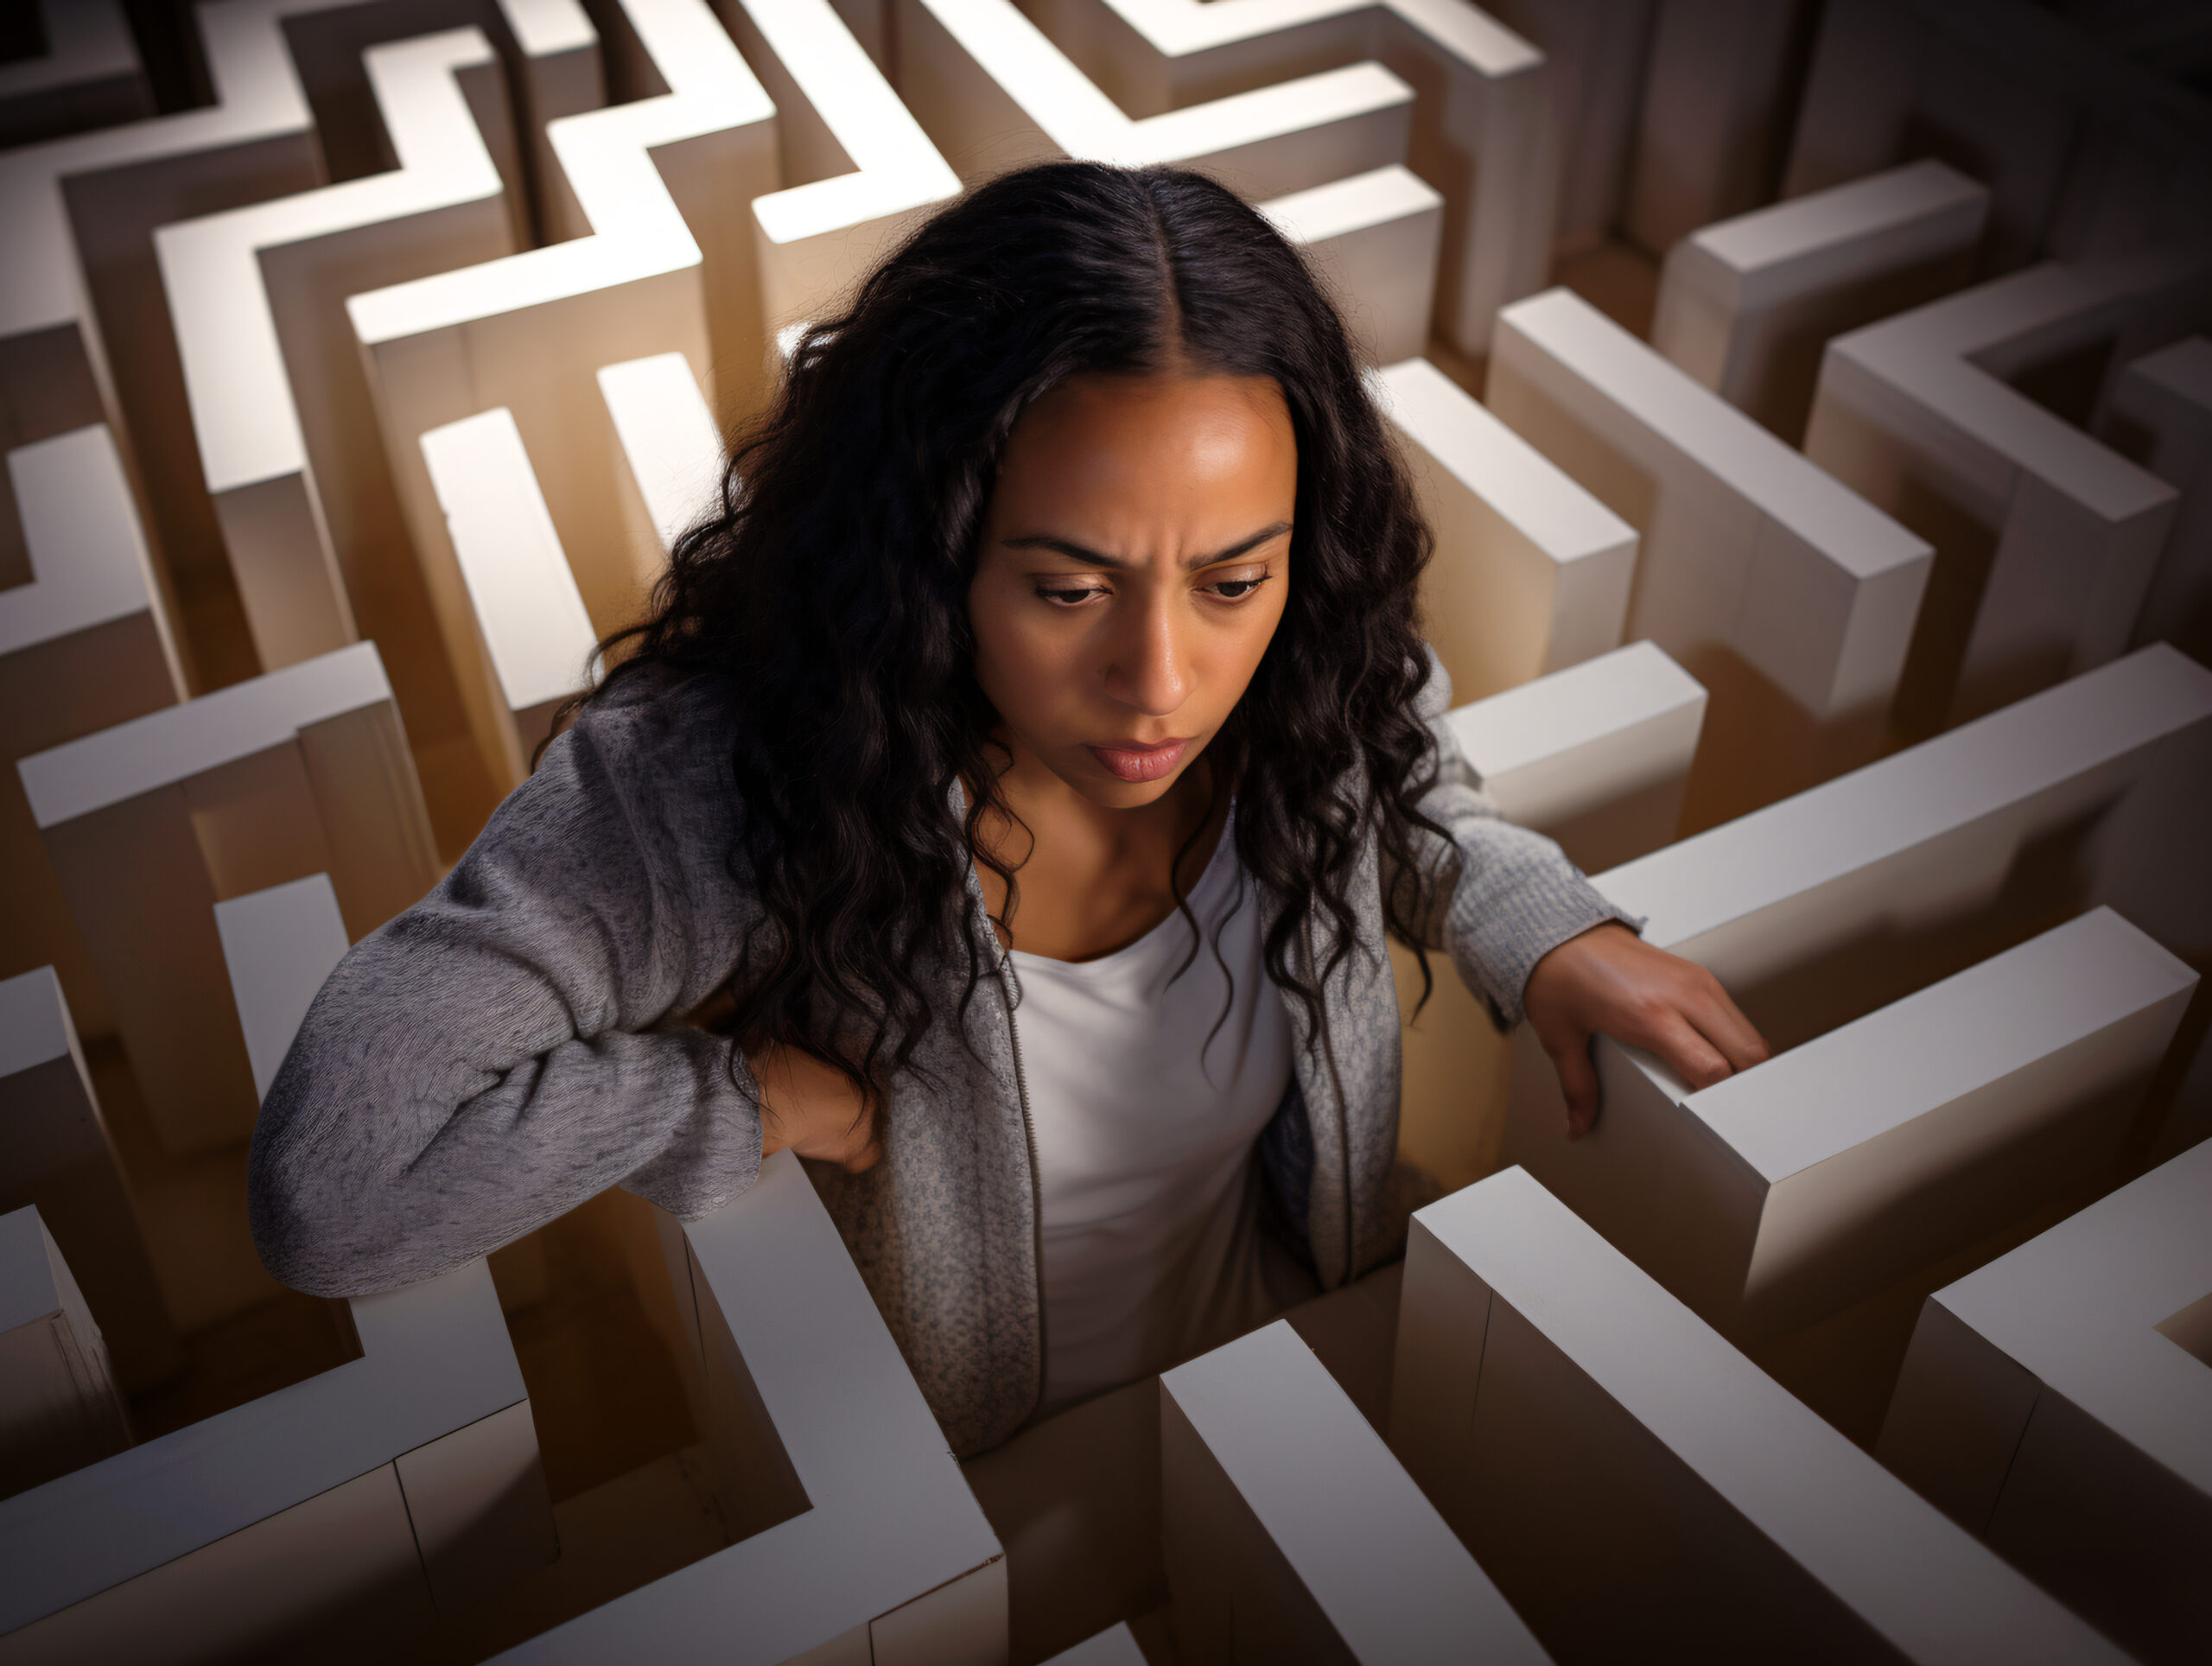 Supplementary materials: diving into the labyrinth of inclusive learning